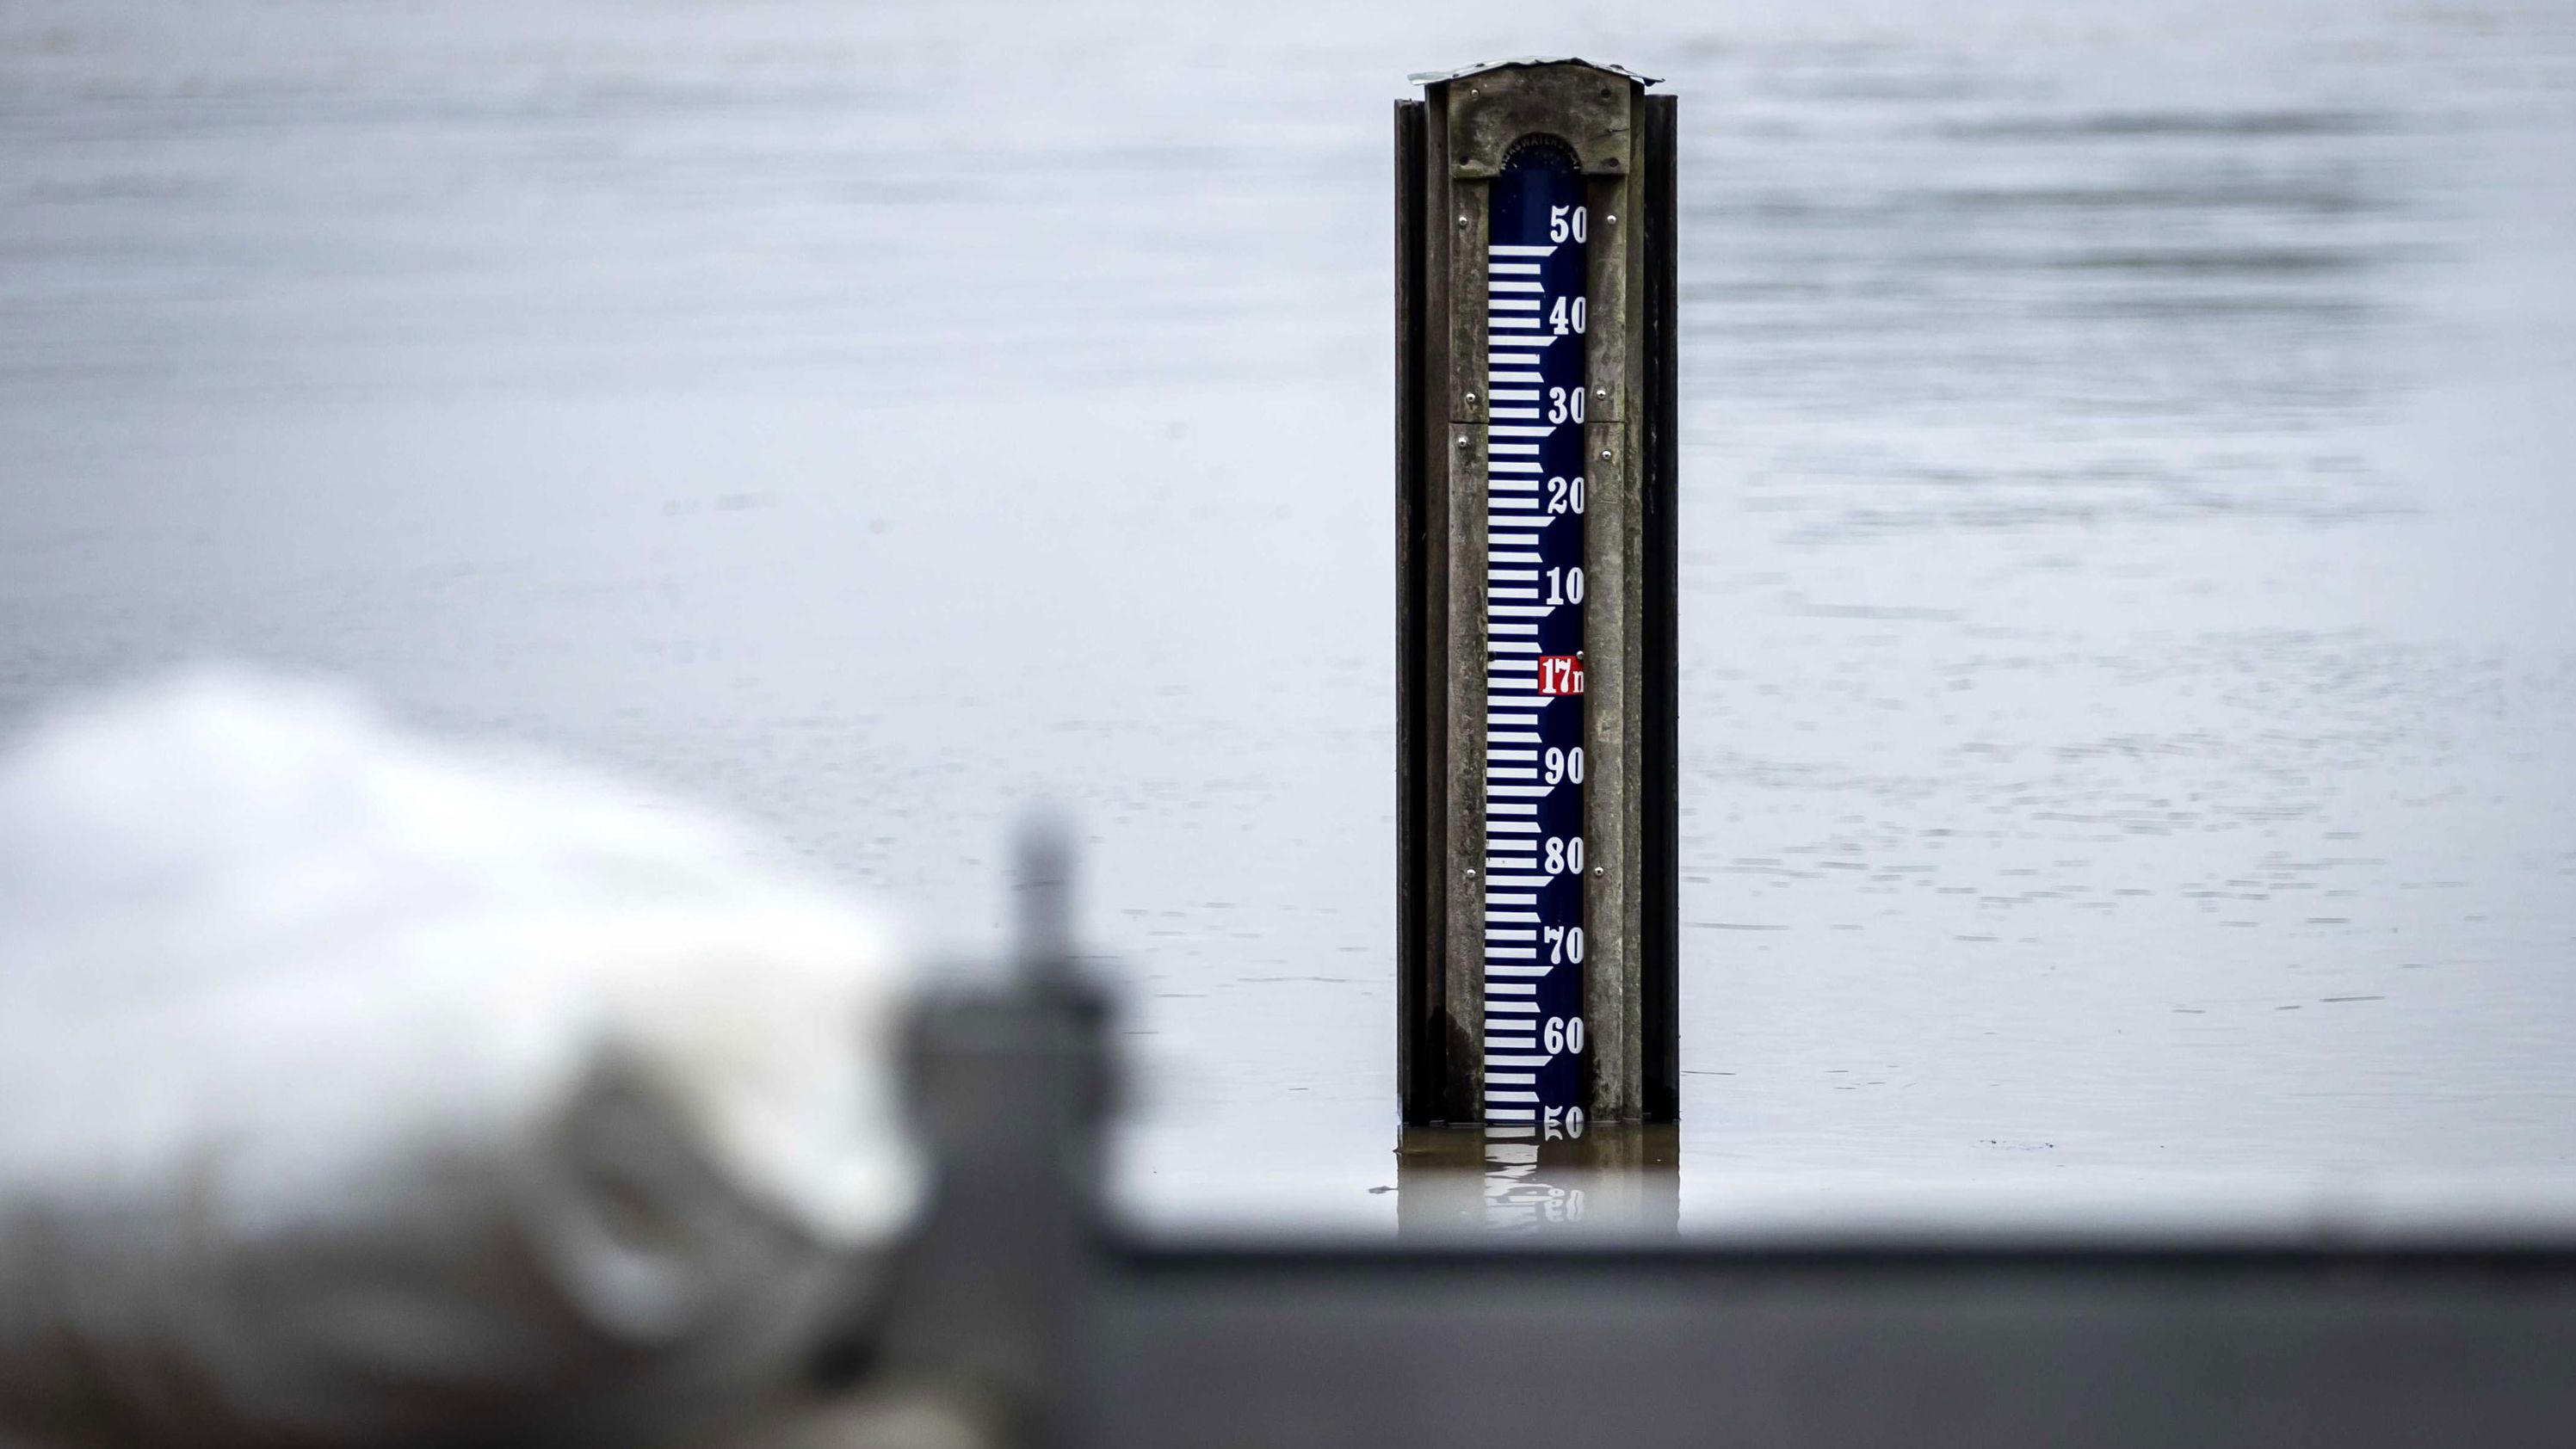 A water level gauge shows rising waters in Arcen, Netherlands, on Saturday. Dutch officials ordered the evacuation of 10,000 people in the municipality of Venlo, as the Meuse was rising there faster than expected.